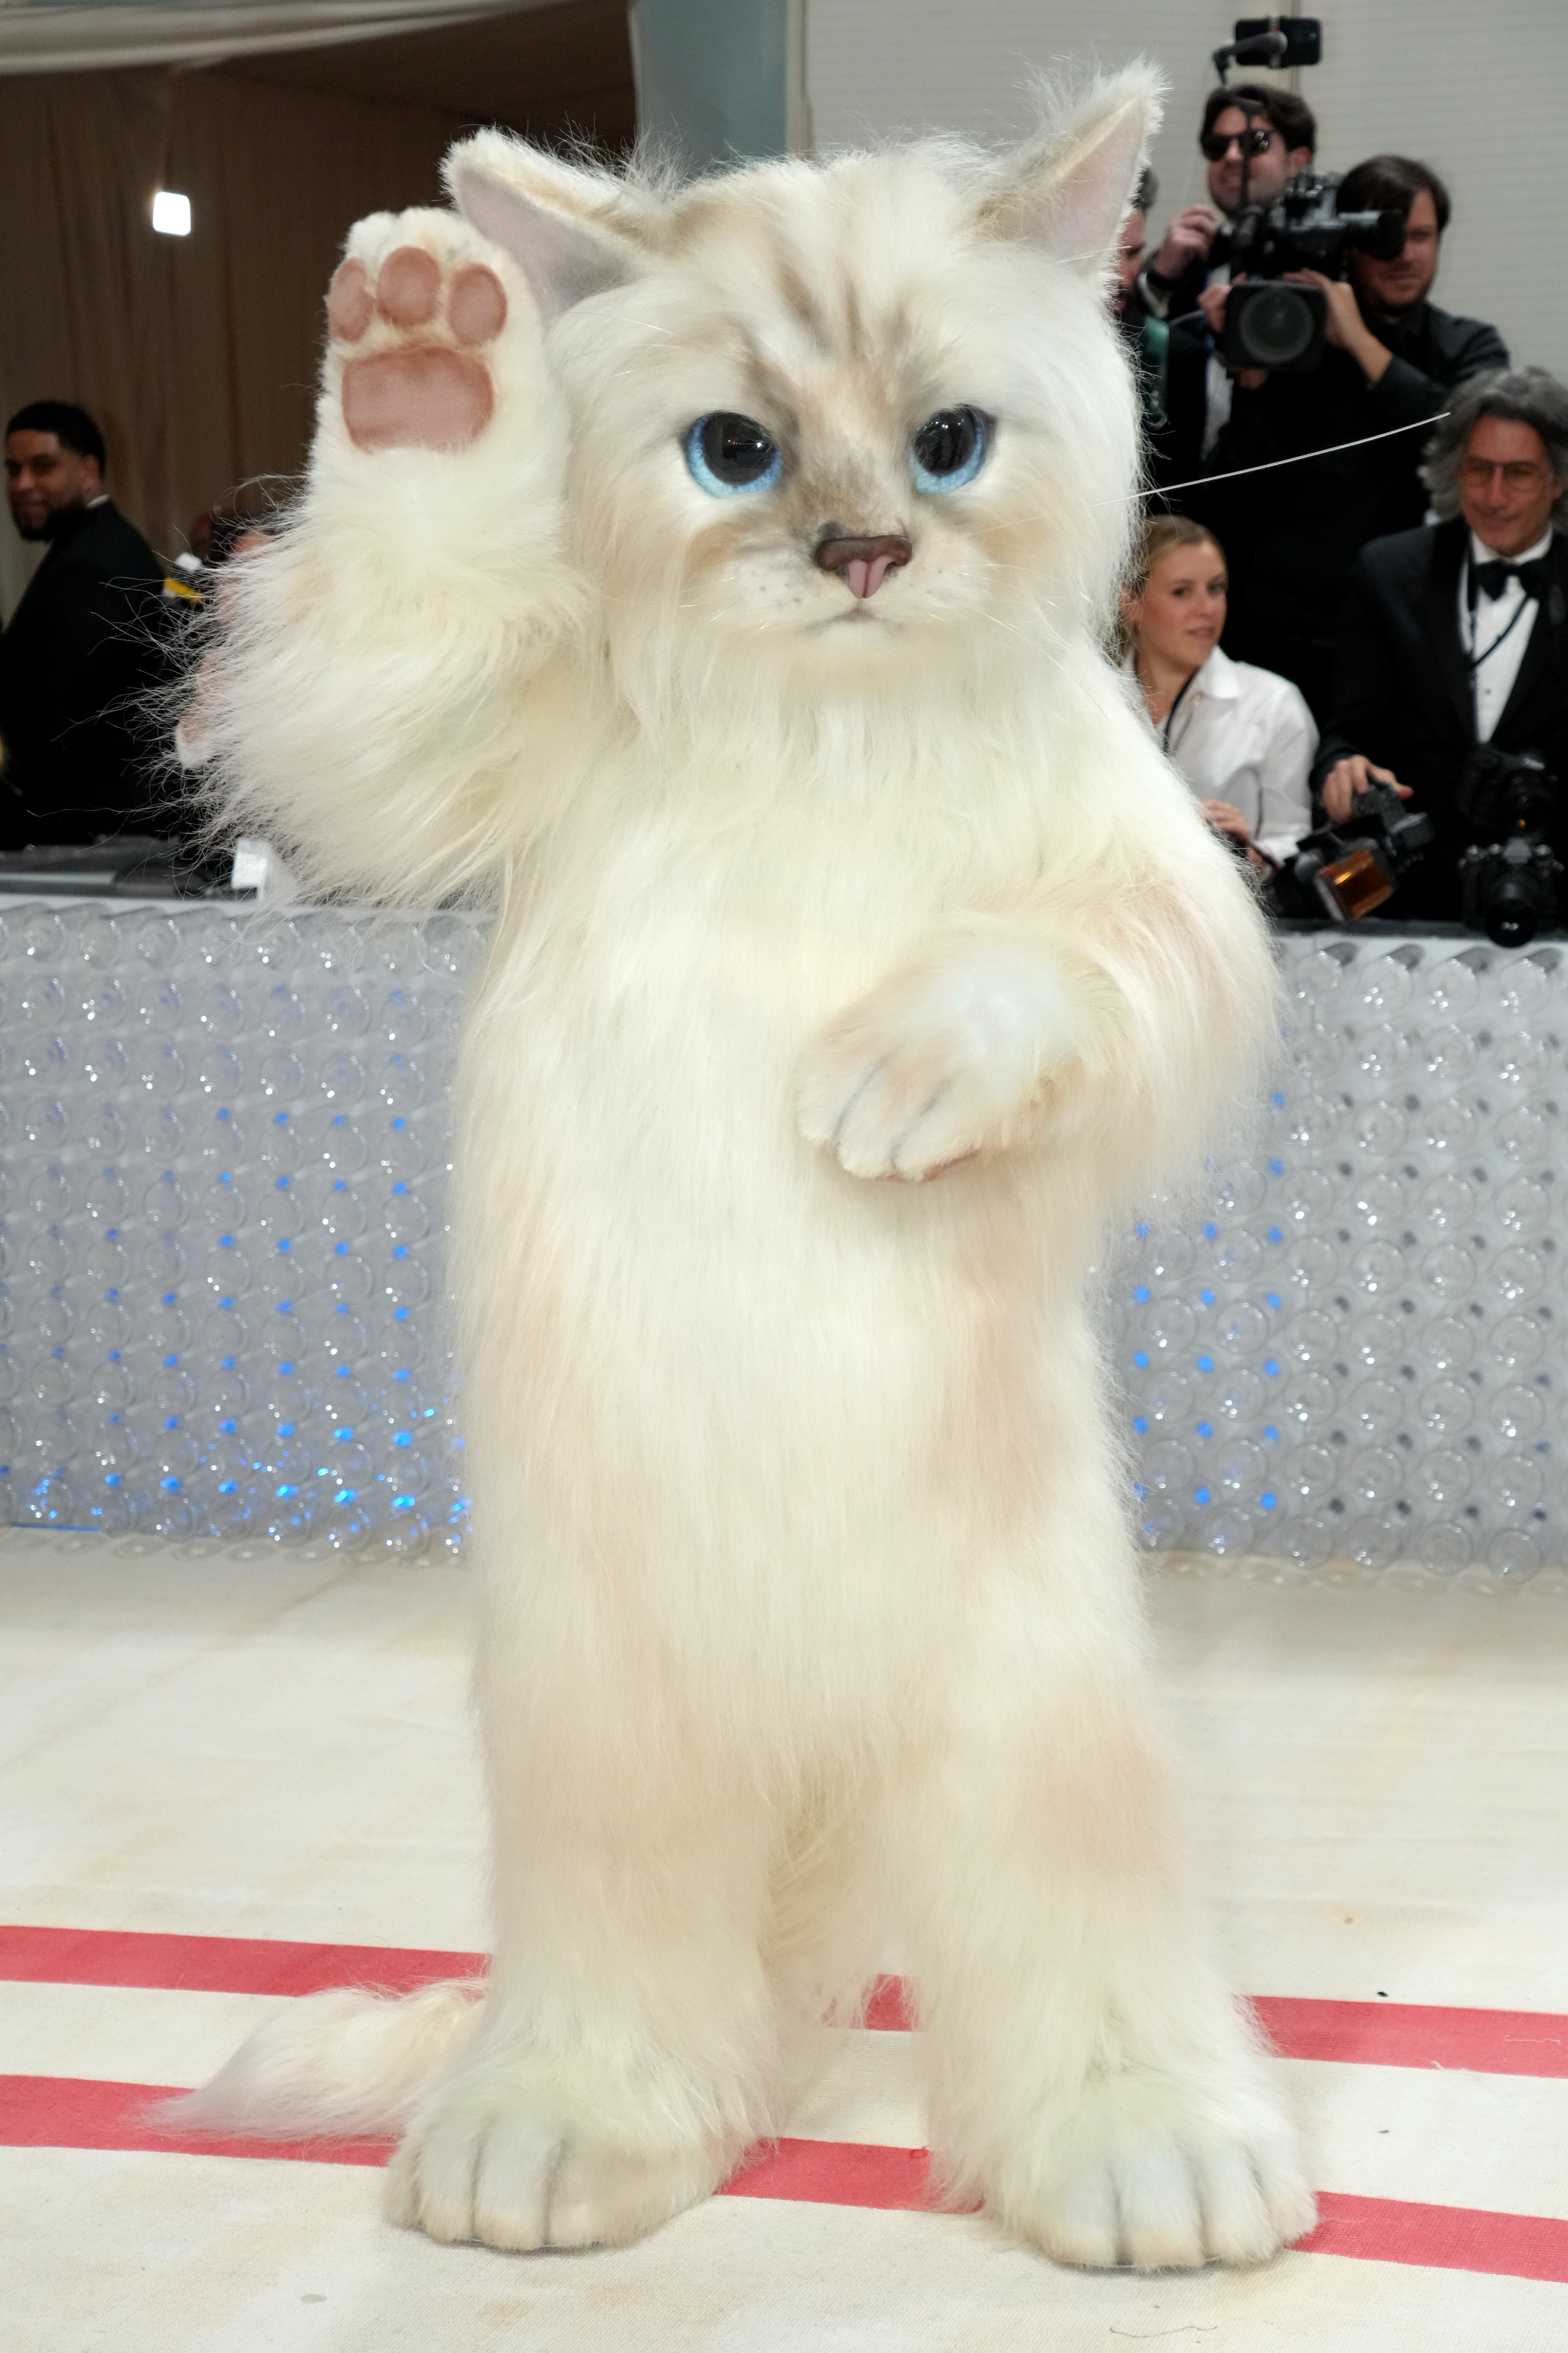 Person in a costume resembling the character Mr. Mistoffelees from the musical &quot;Cats&quot; standing on a red carpet